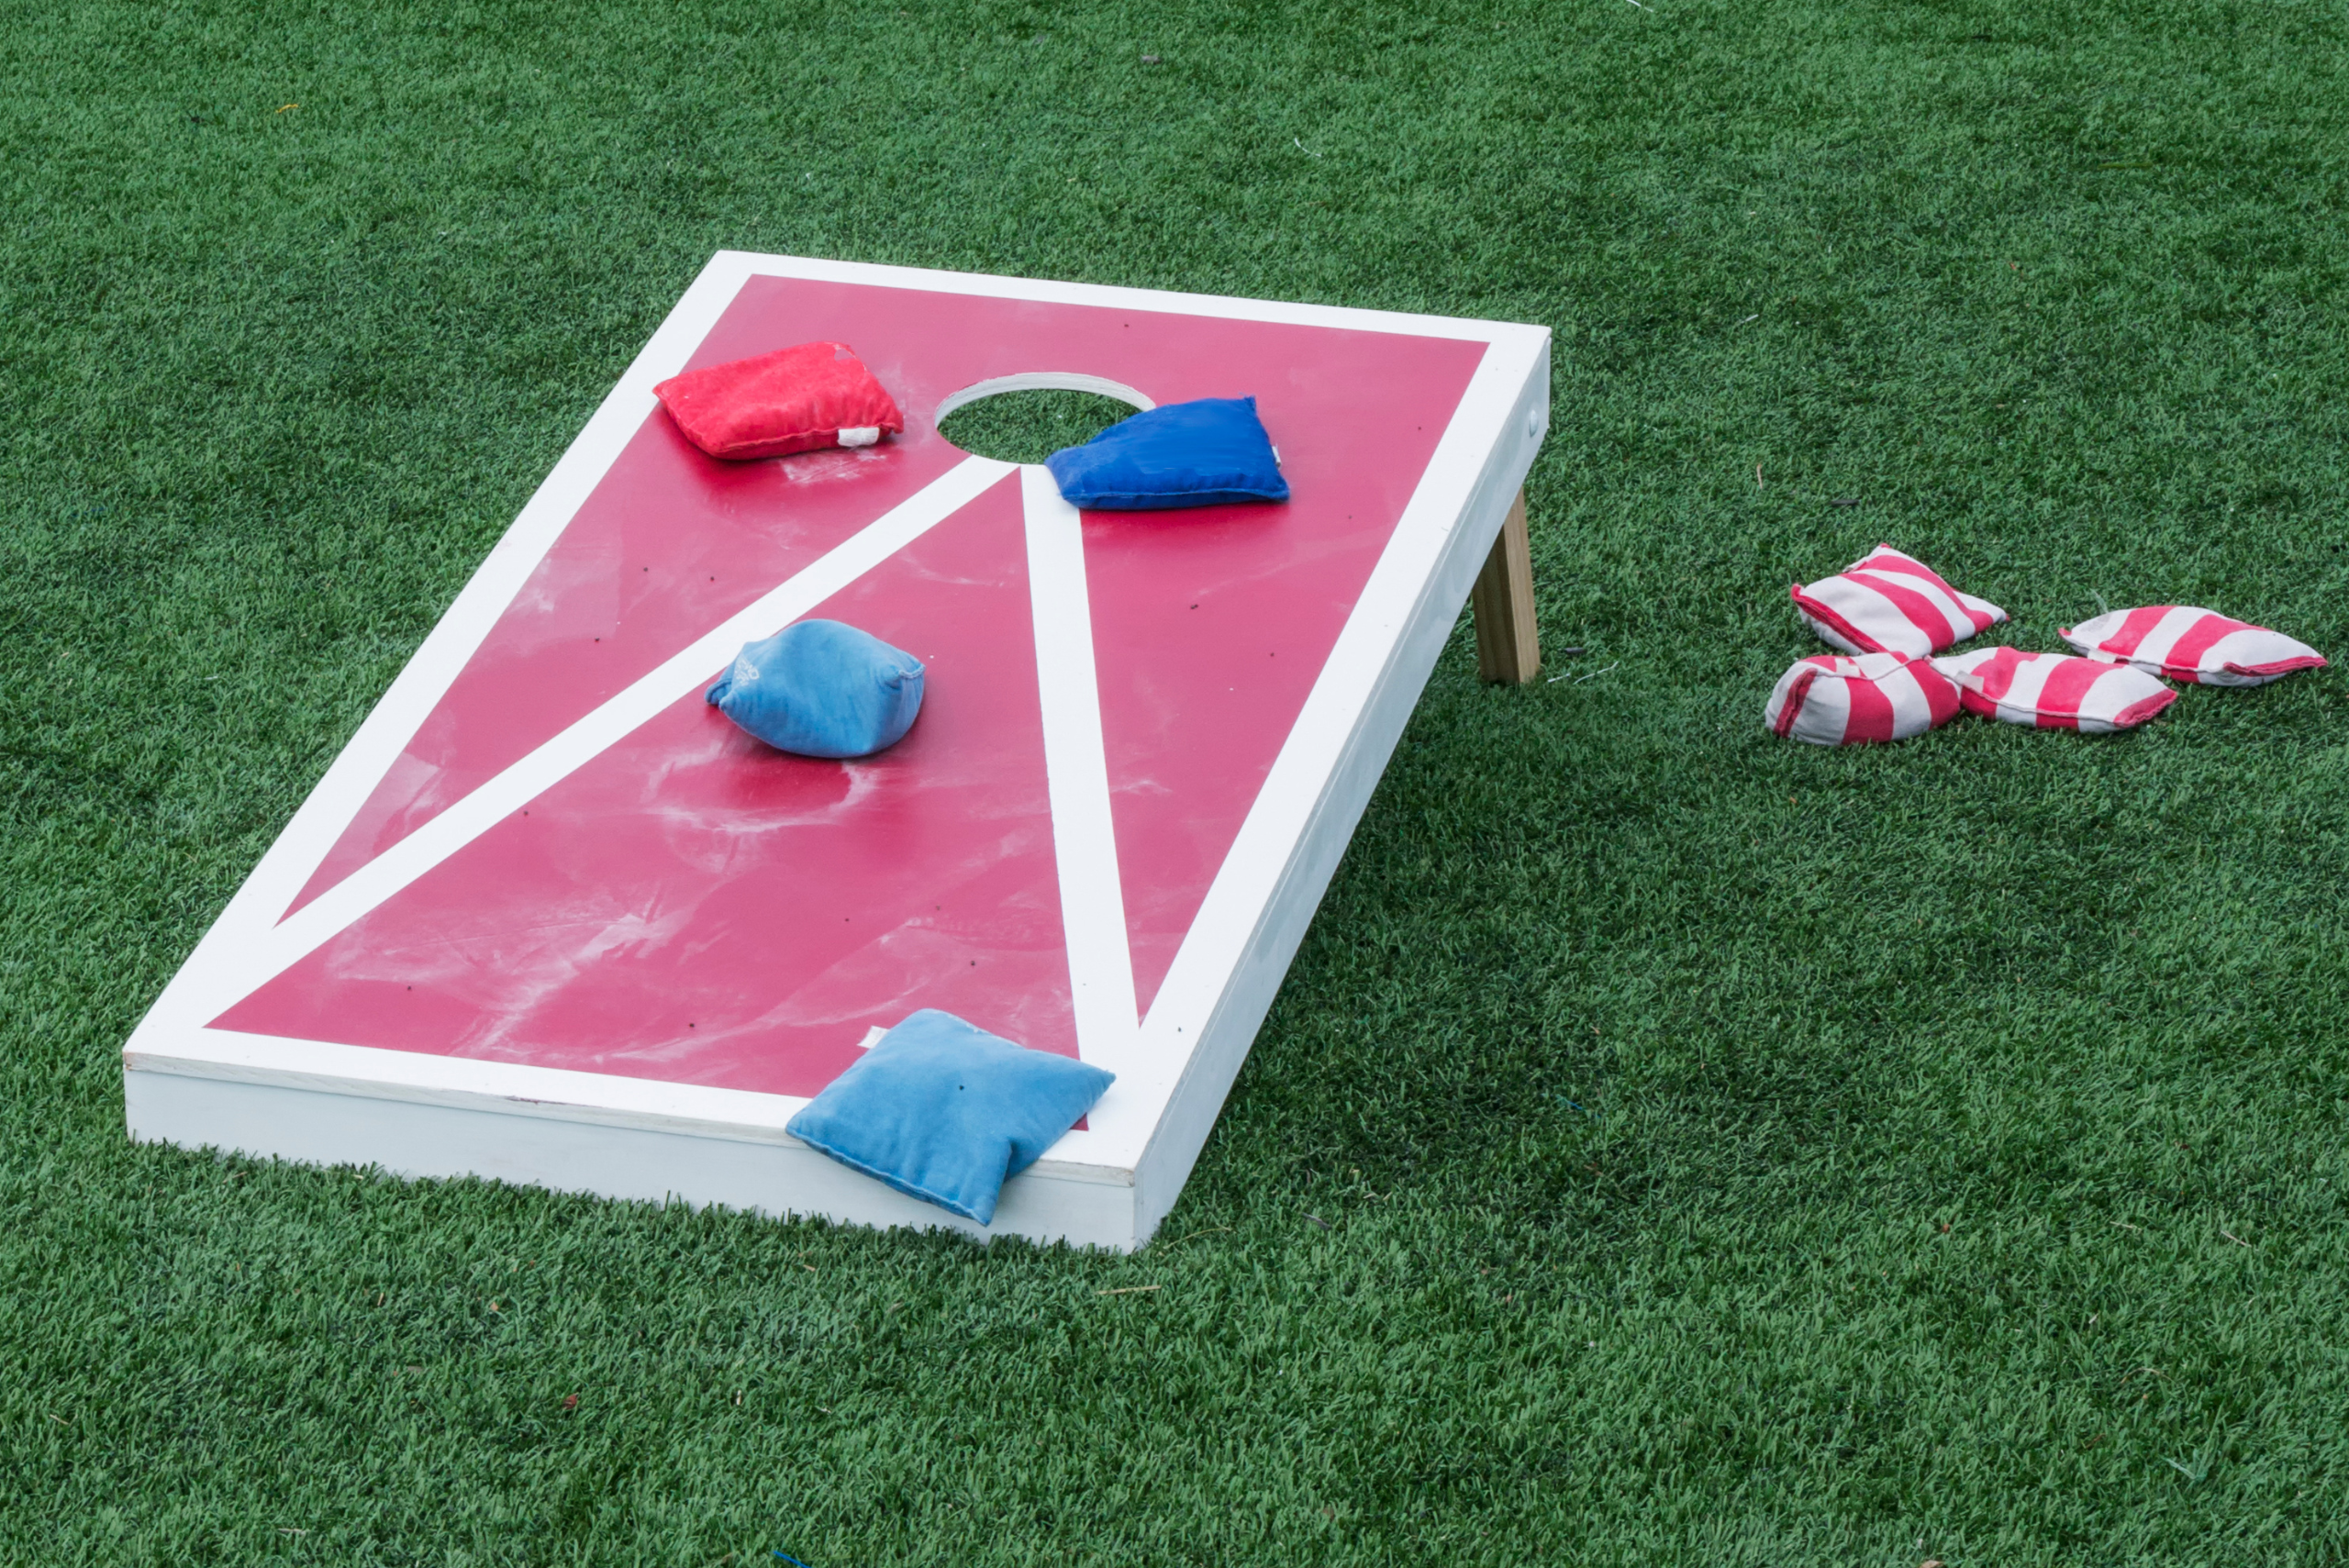 Red corn hole board with white lines.